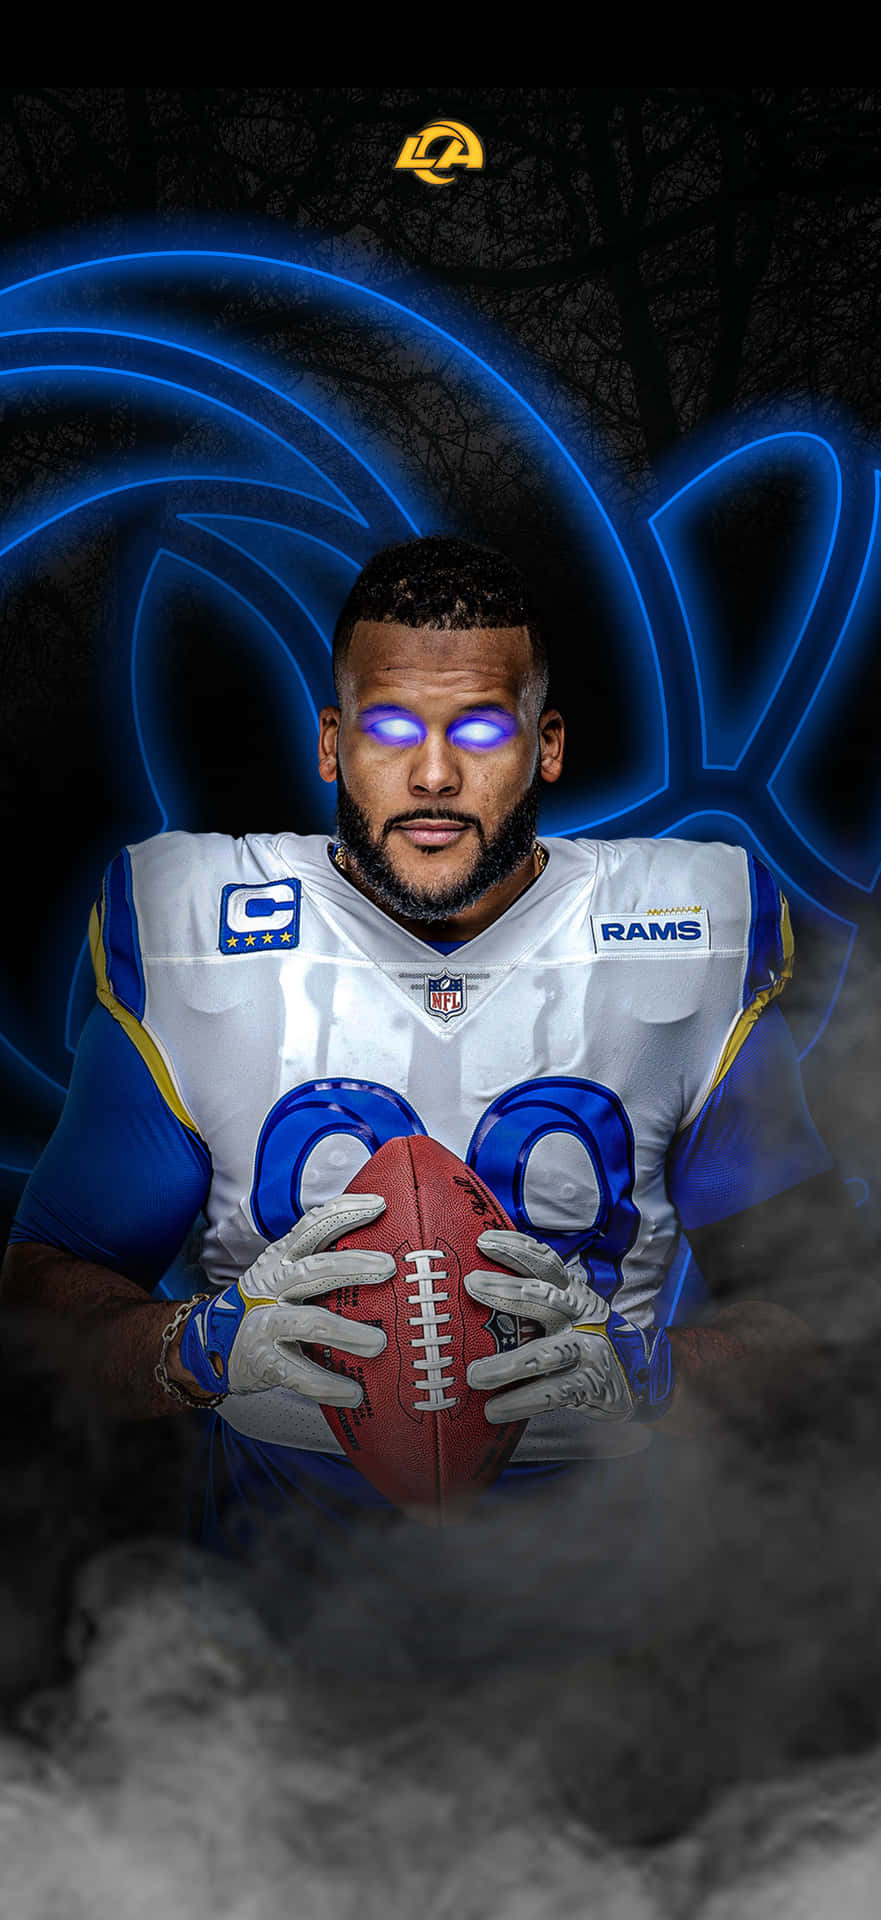 Get your hands on a Rams iPhone and stay connected to the team, wherever you go! Wallpaper